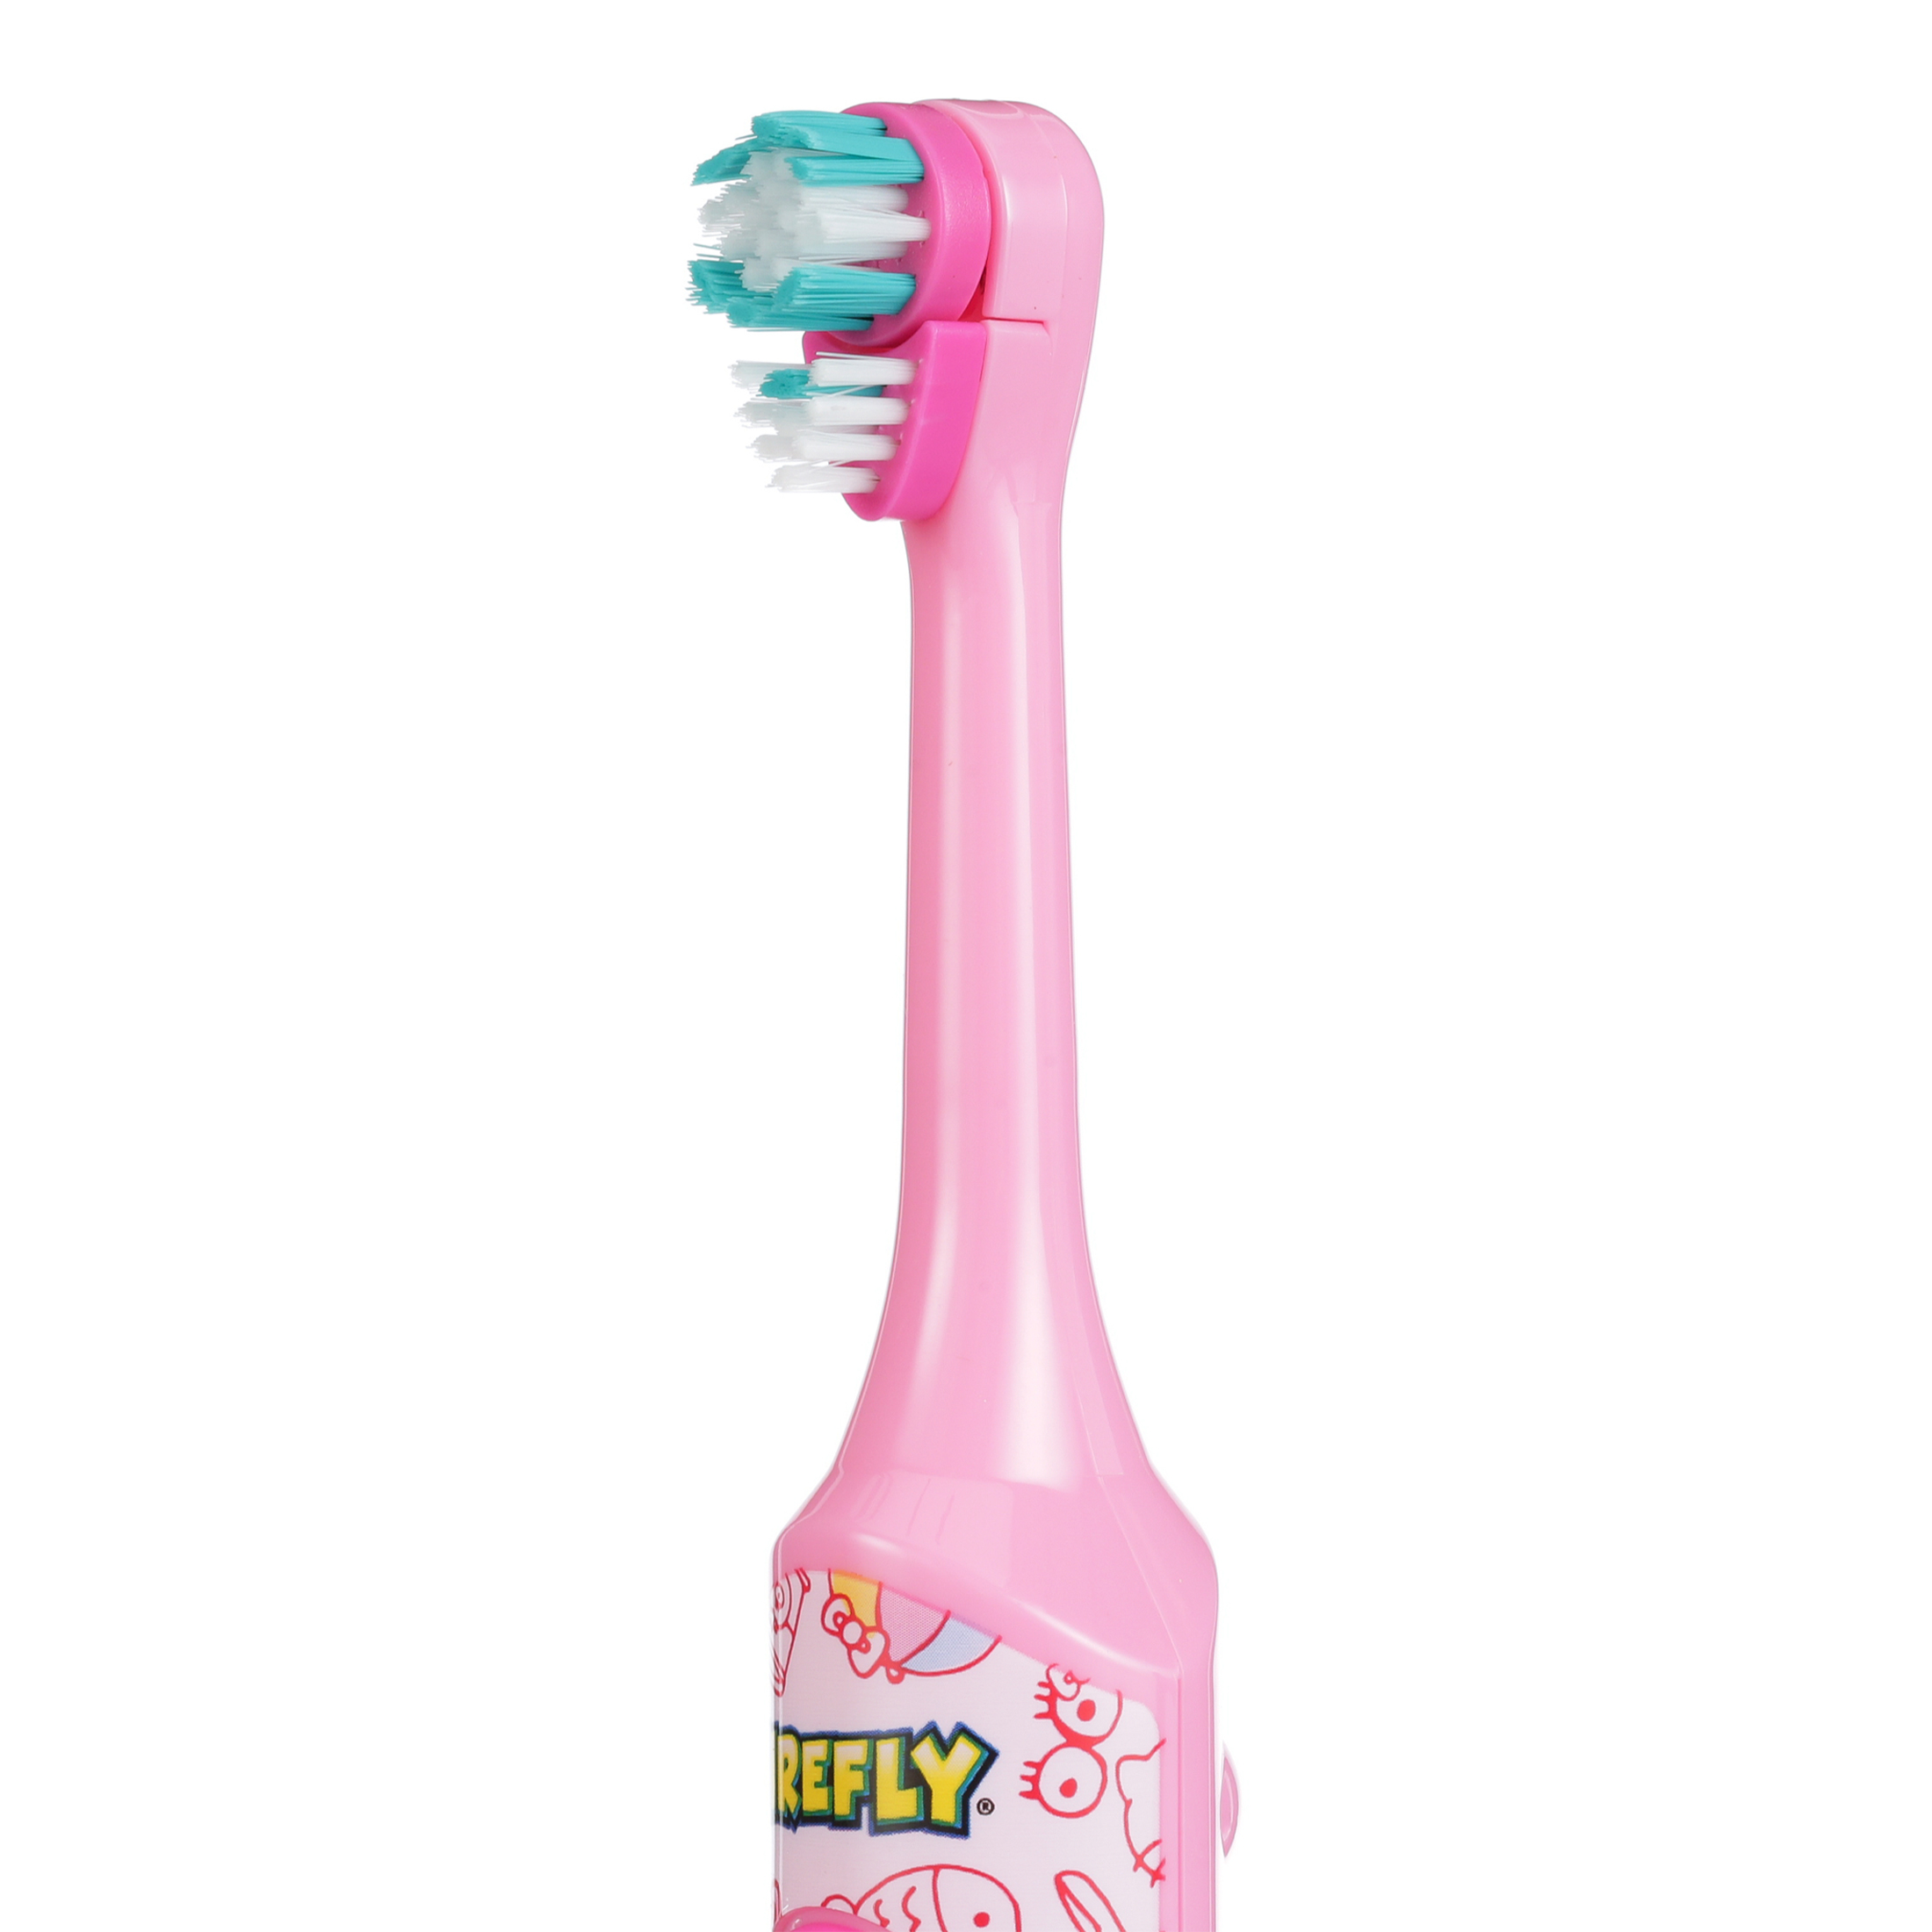 Firefly Hello Kitty Power Toothbrush with Cover, Battery Included, Ages 3+ - image 10 of 10